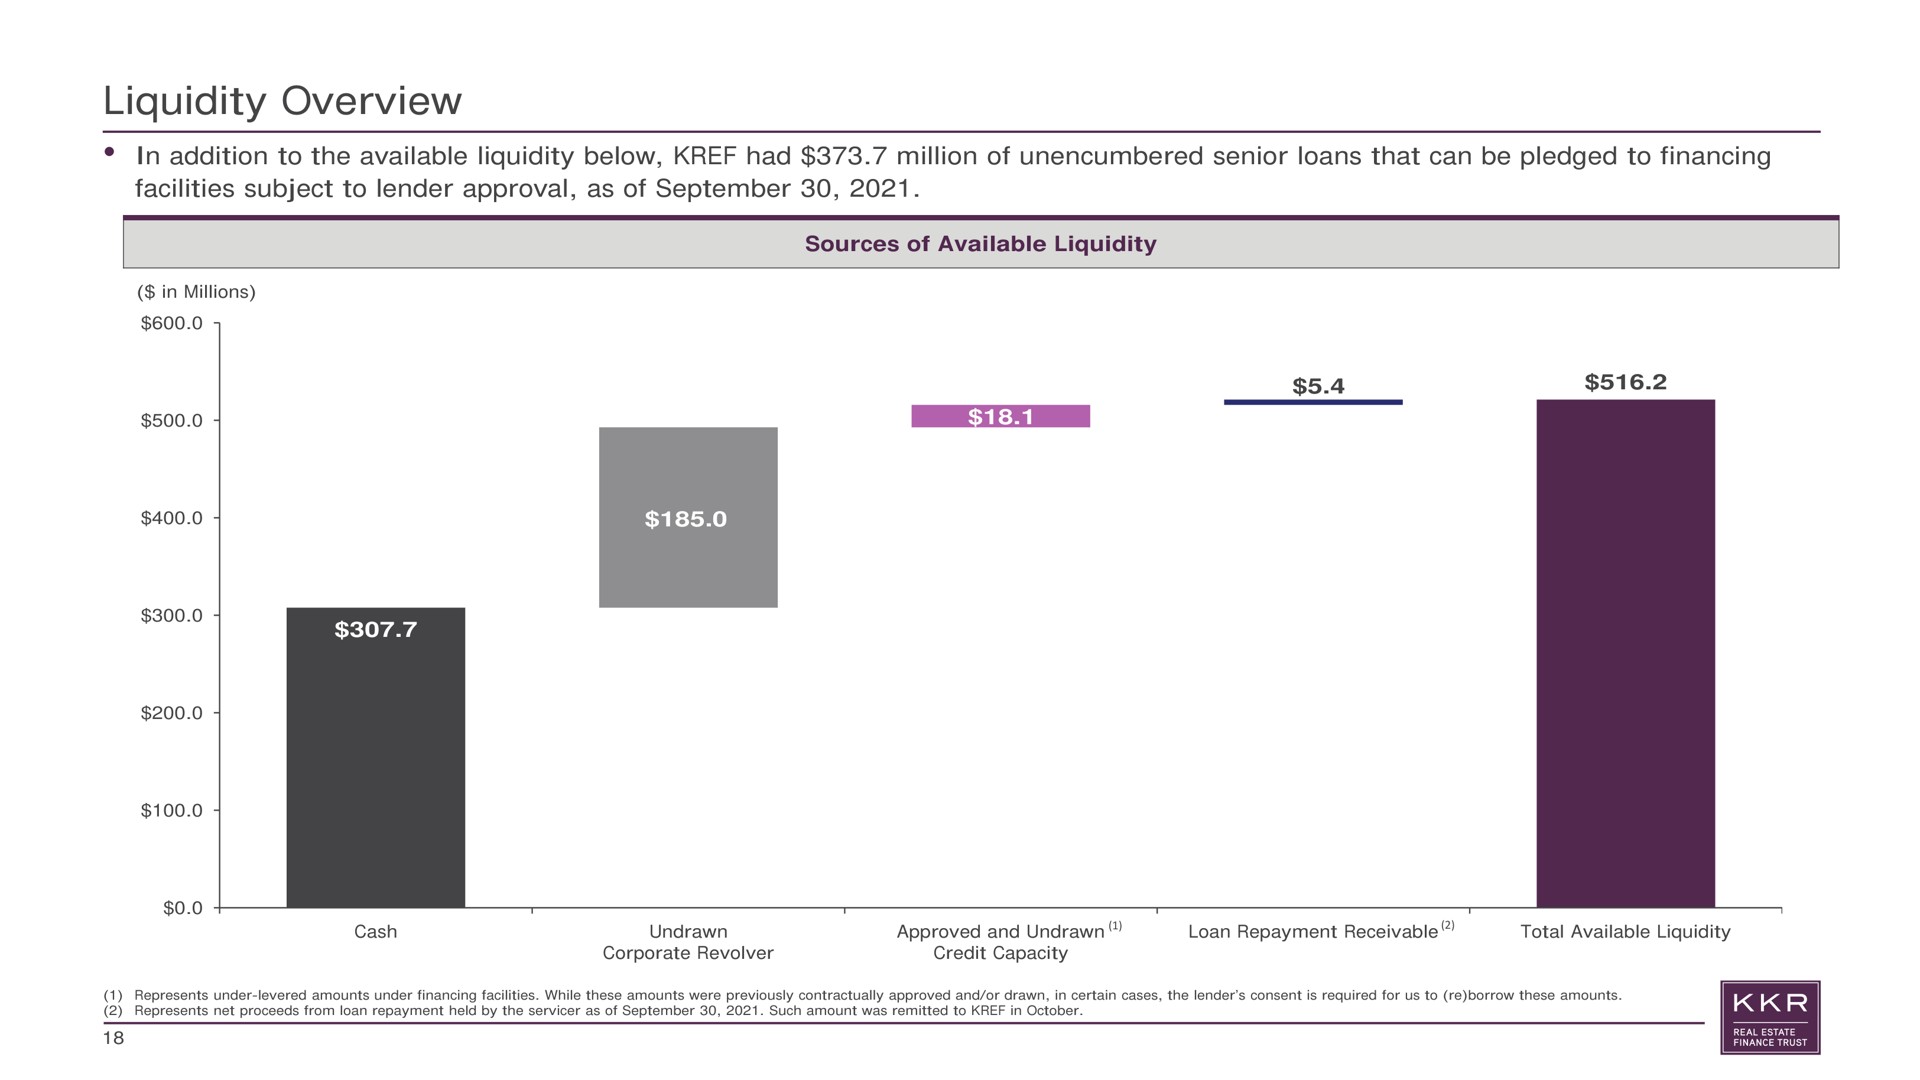 liquidity overview in addition to the available liquidity below had million of unencumbered senior loans that can be pledged to financing facilities subject to lender approval as of sources of available liquidity | KKR Real Estate Finance Trust